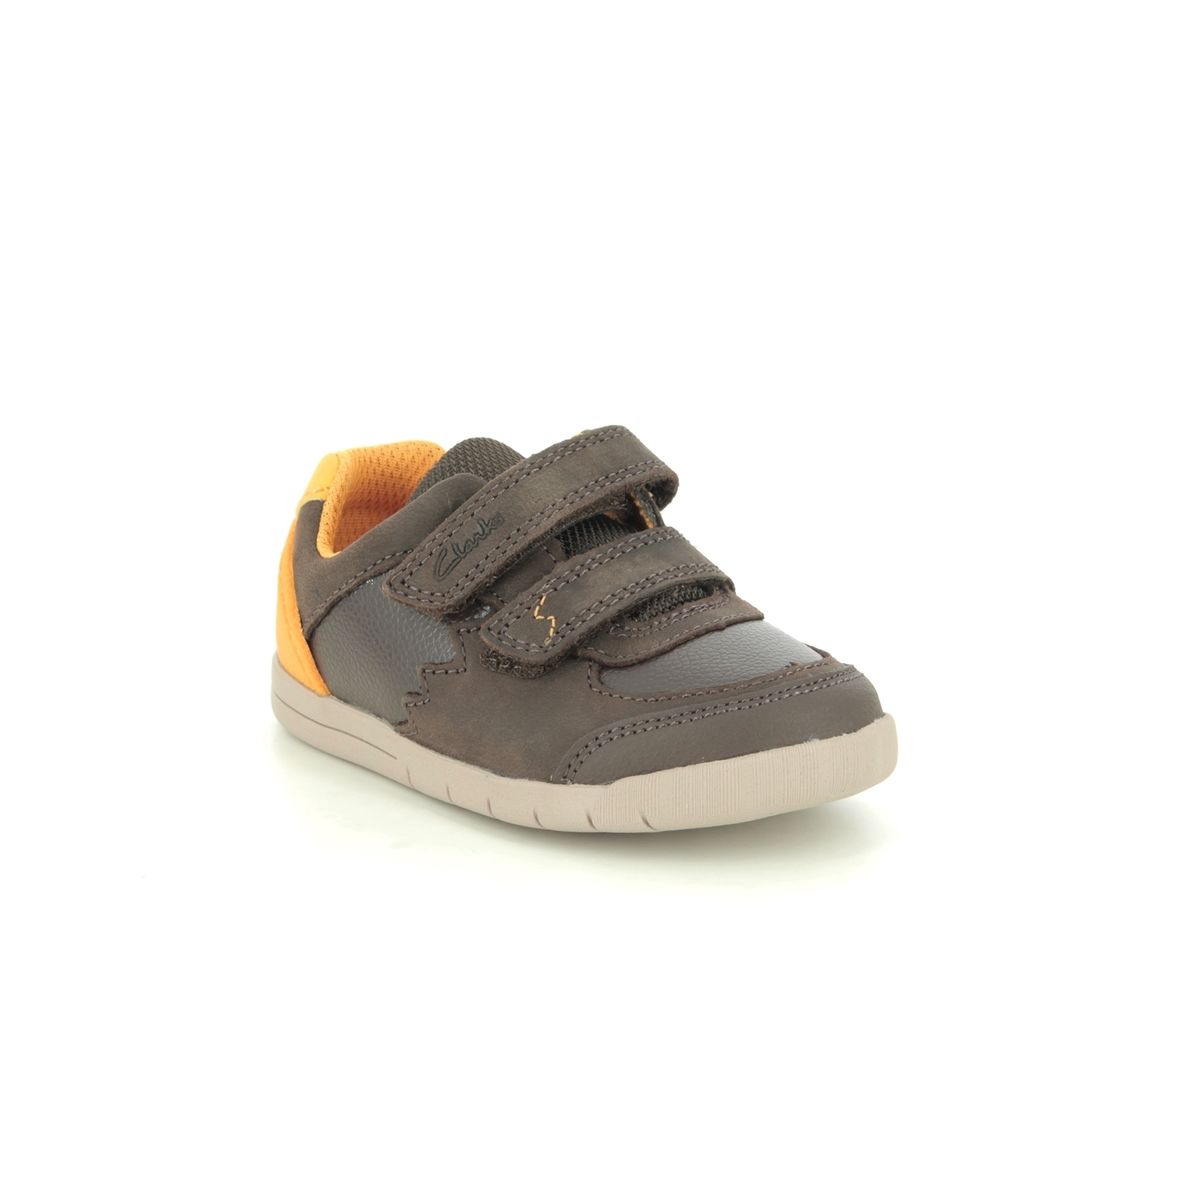 Clarks Rex Quest T Brown Leather Kids Boys Toddler Shoes 567756F In Size 4 In Plain Brown Leather F Width Fitting Regular Fit For kids